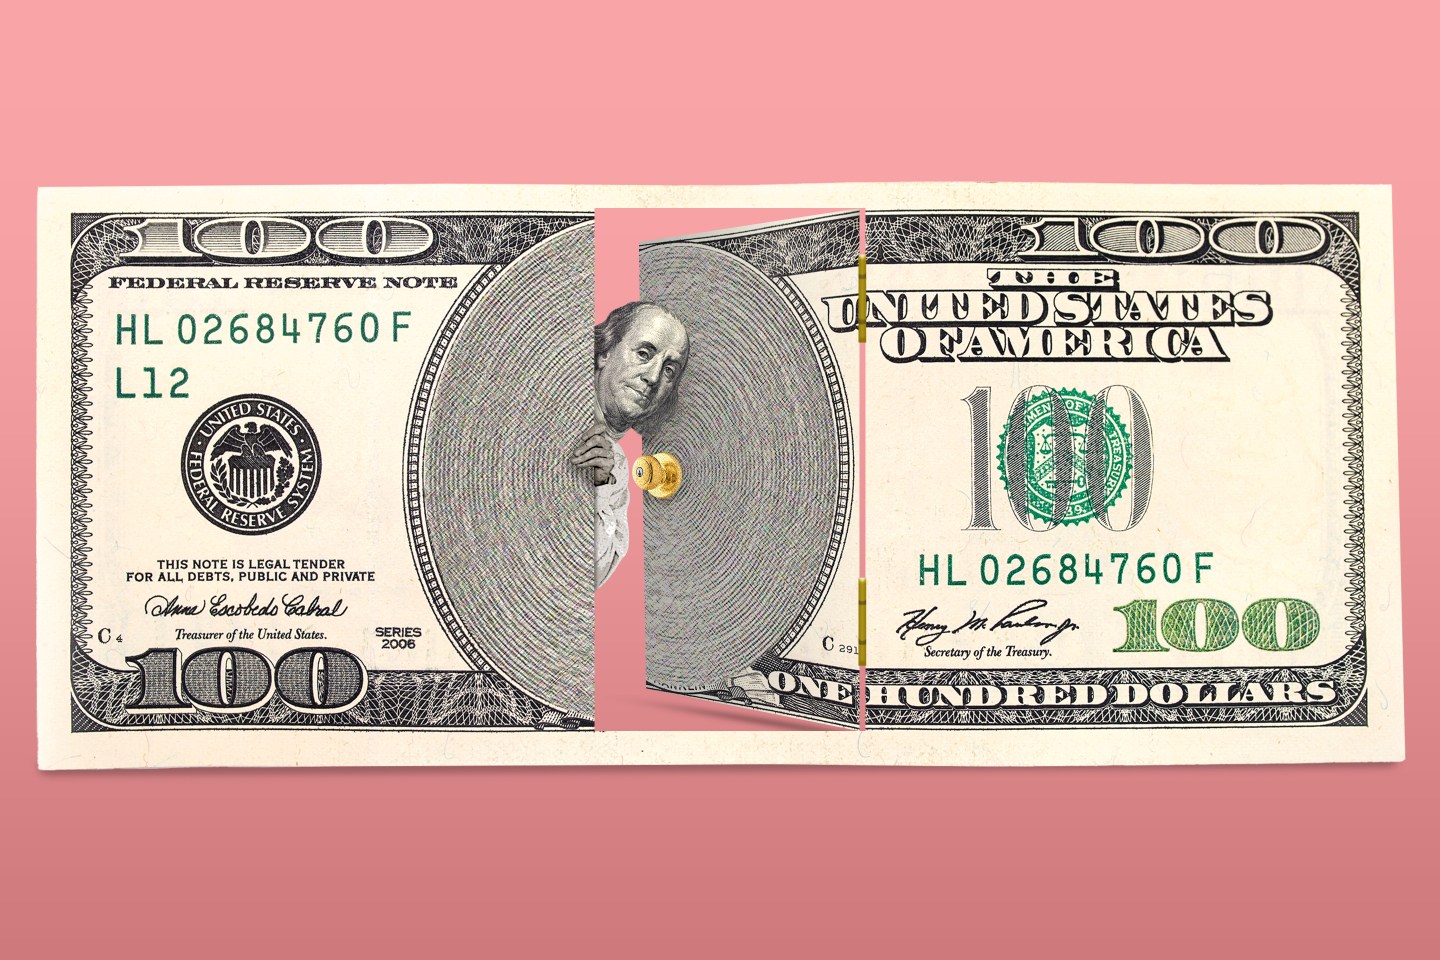 Photo illustration of a $100 bill with a door swinging backward at its center and Benjamin Franklin peeking around the door frame.